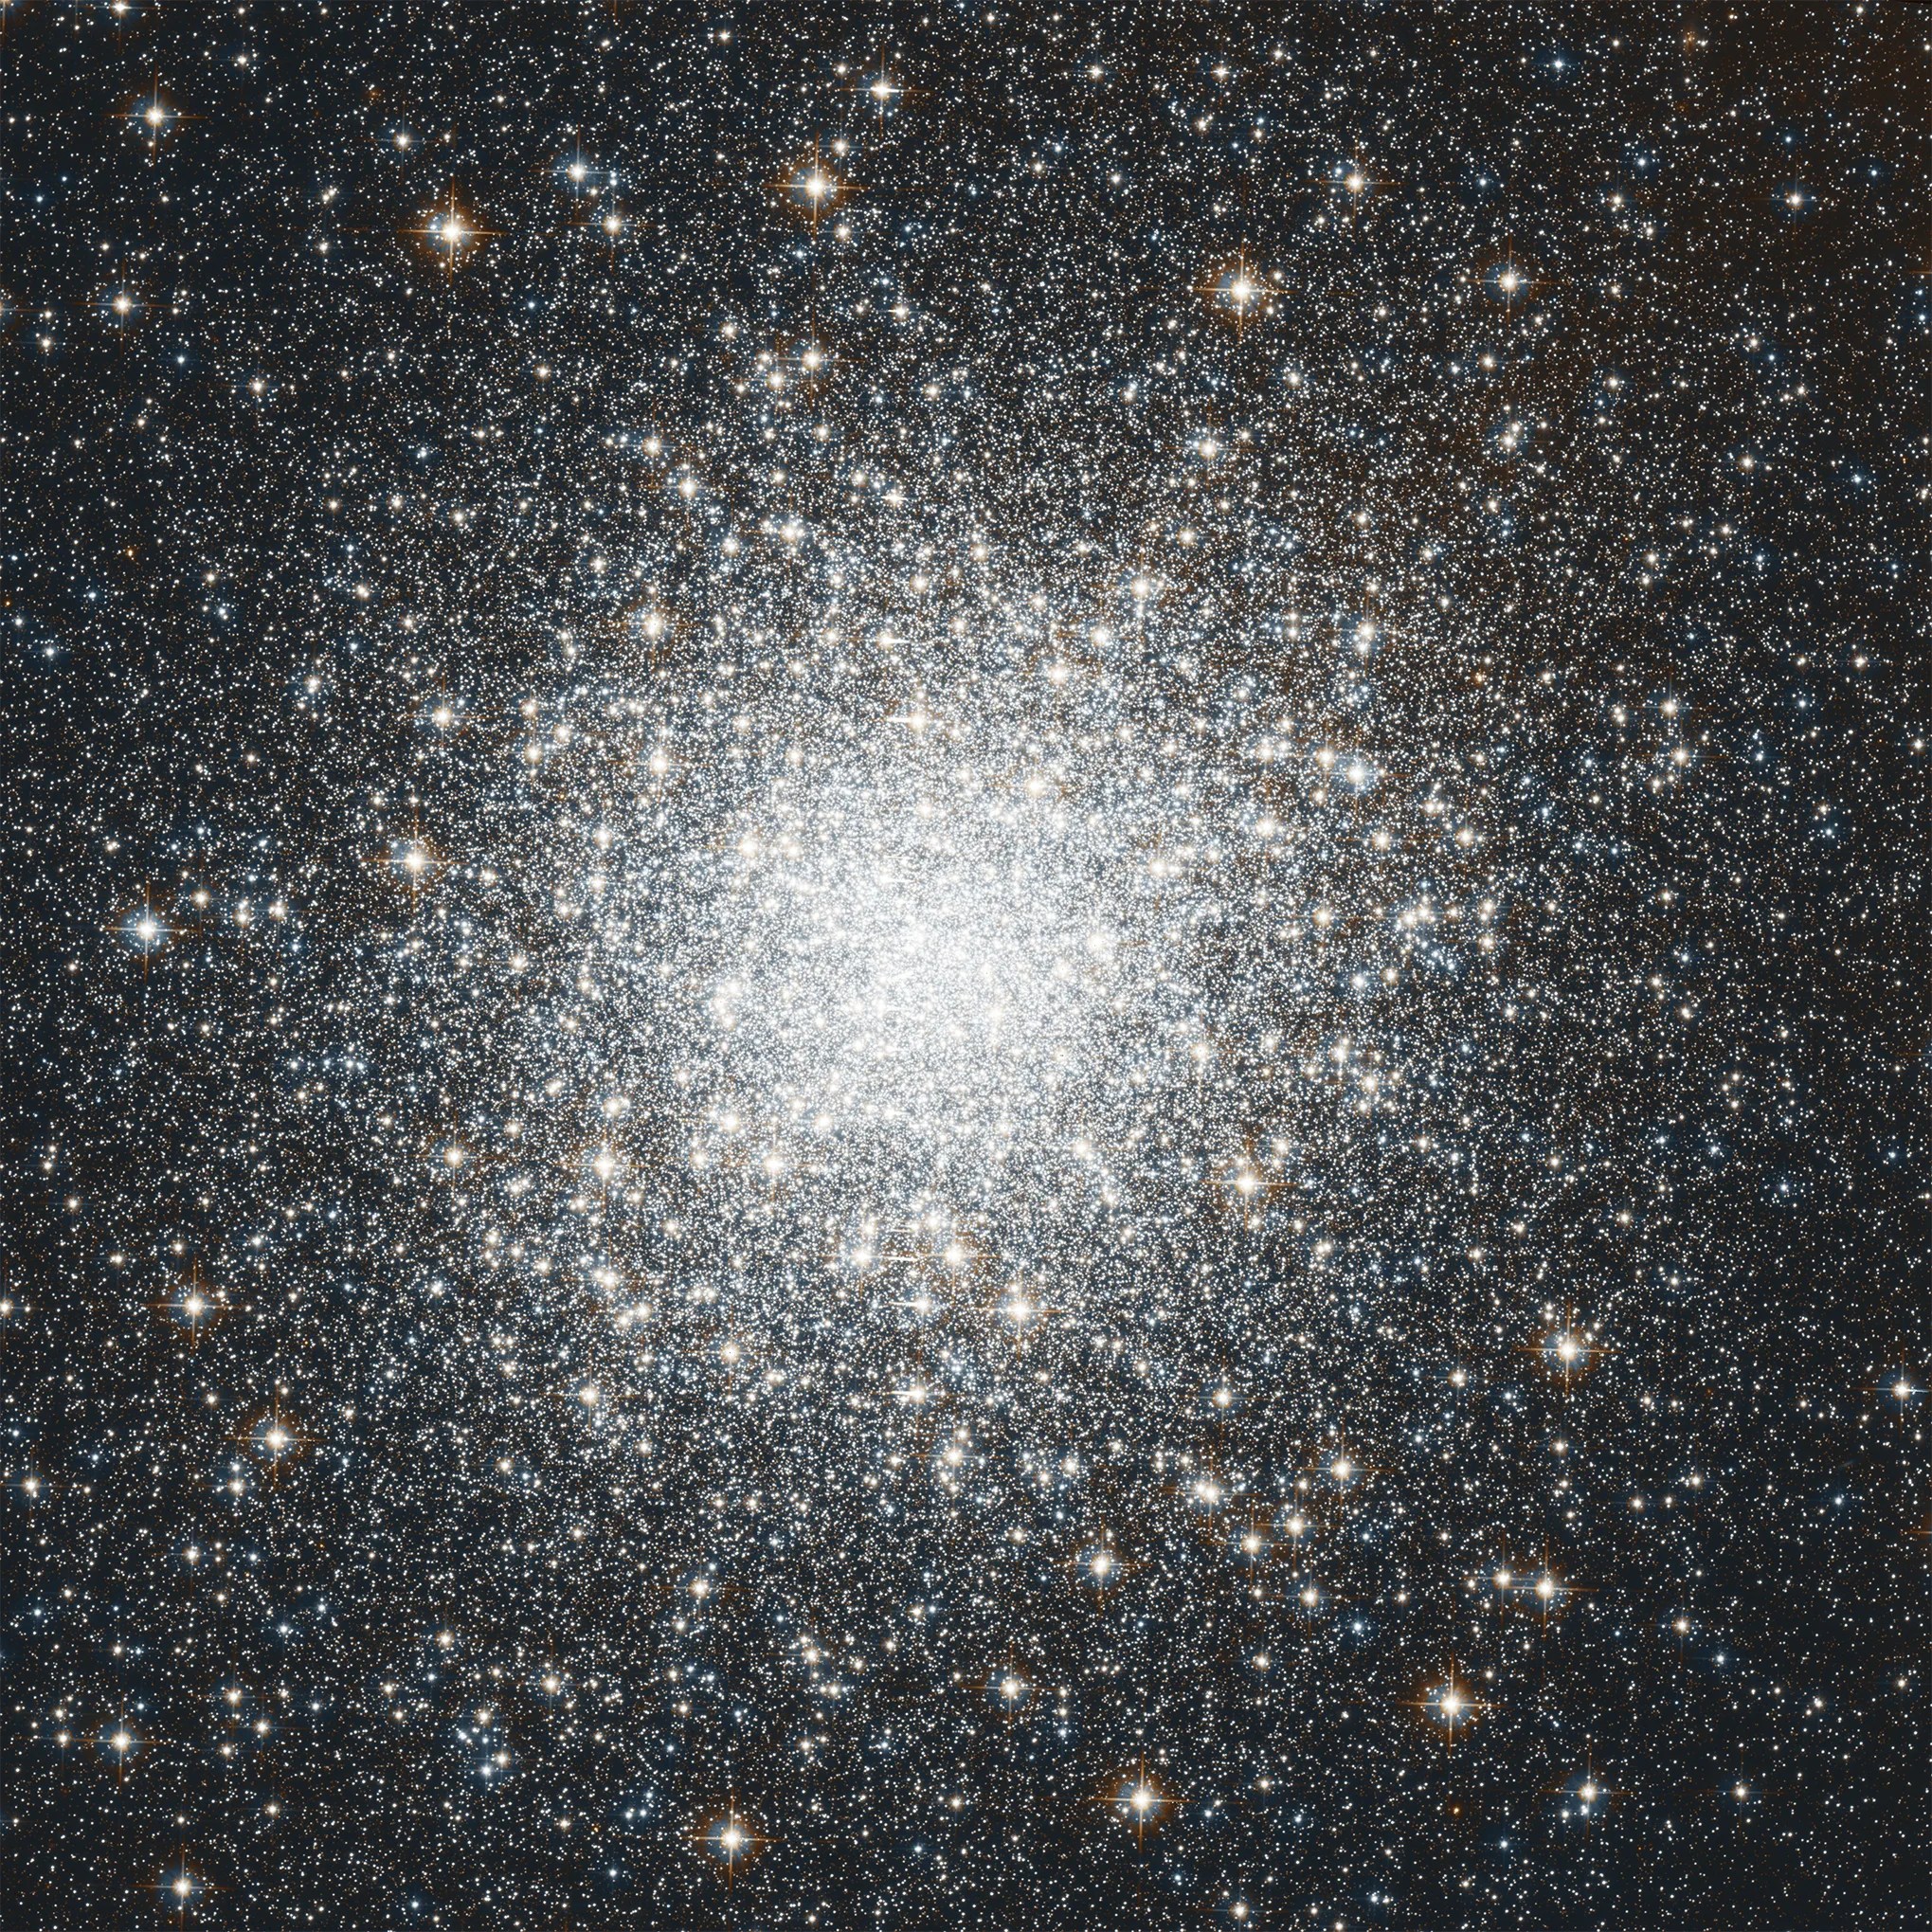 A Hubble image of a ball of thousands of stars